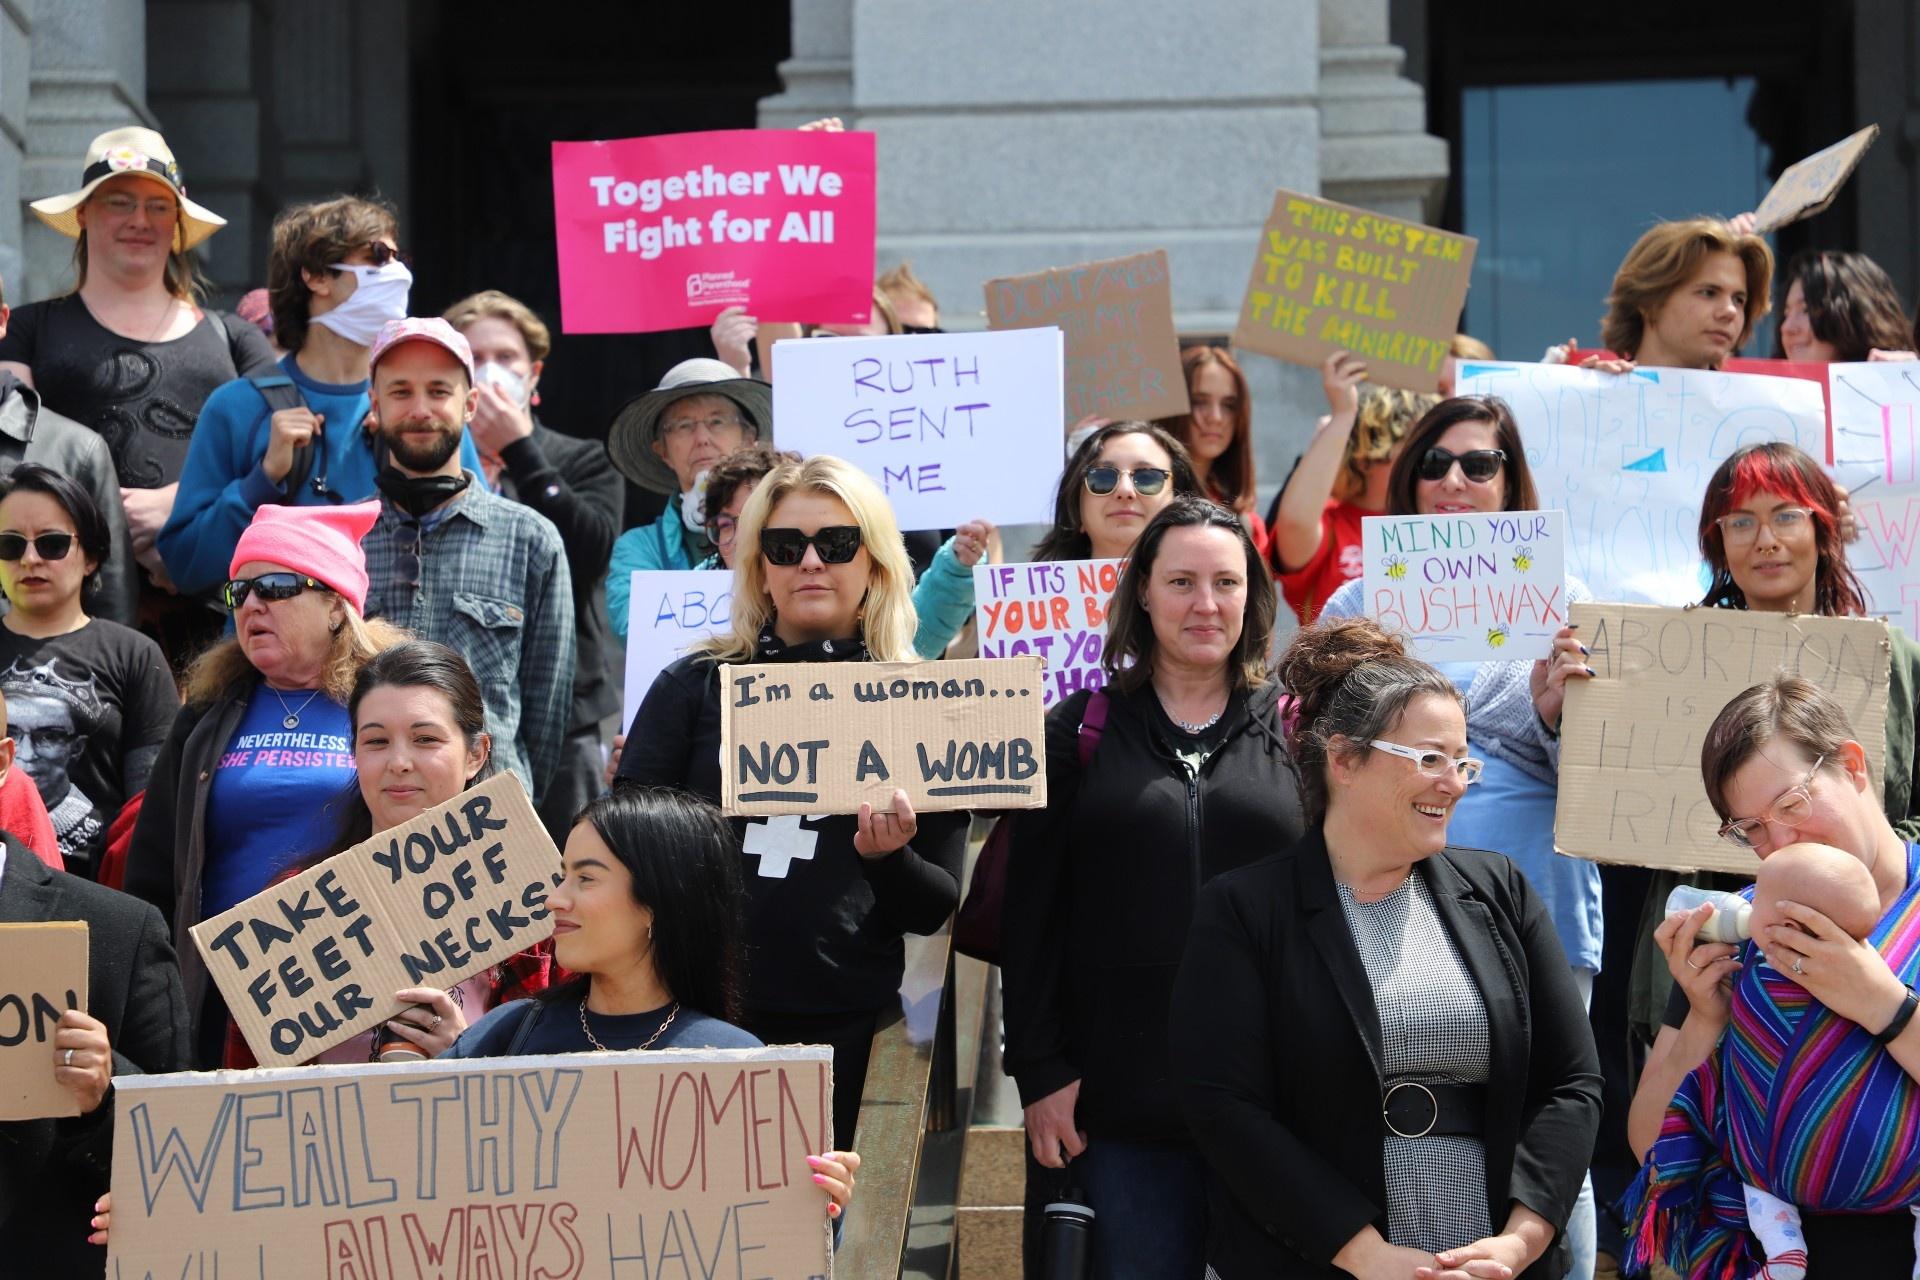 A group of Coloradans rally on the steps of the State Capitol Tuesday, May 3 in support of safe, accessible and legal abortions. The rally was organized after Politico published a draft opinion from the Supreme Court showing the court's conservative majority intends to reverse Roe v. Wade.